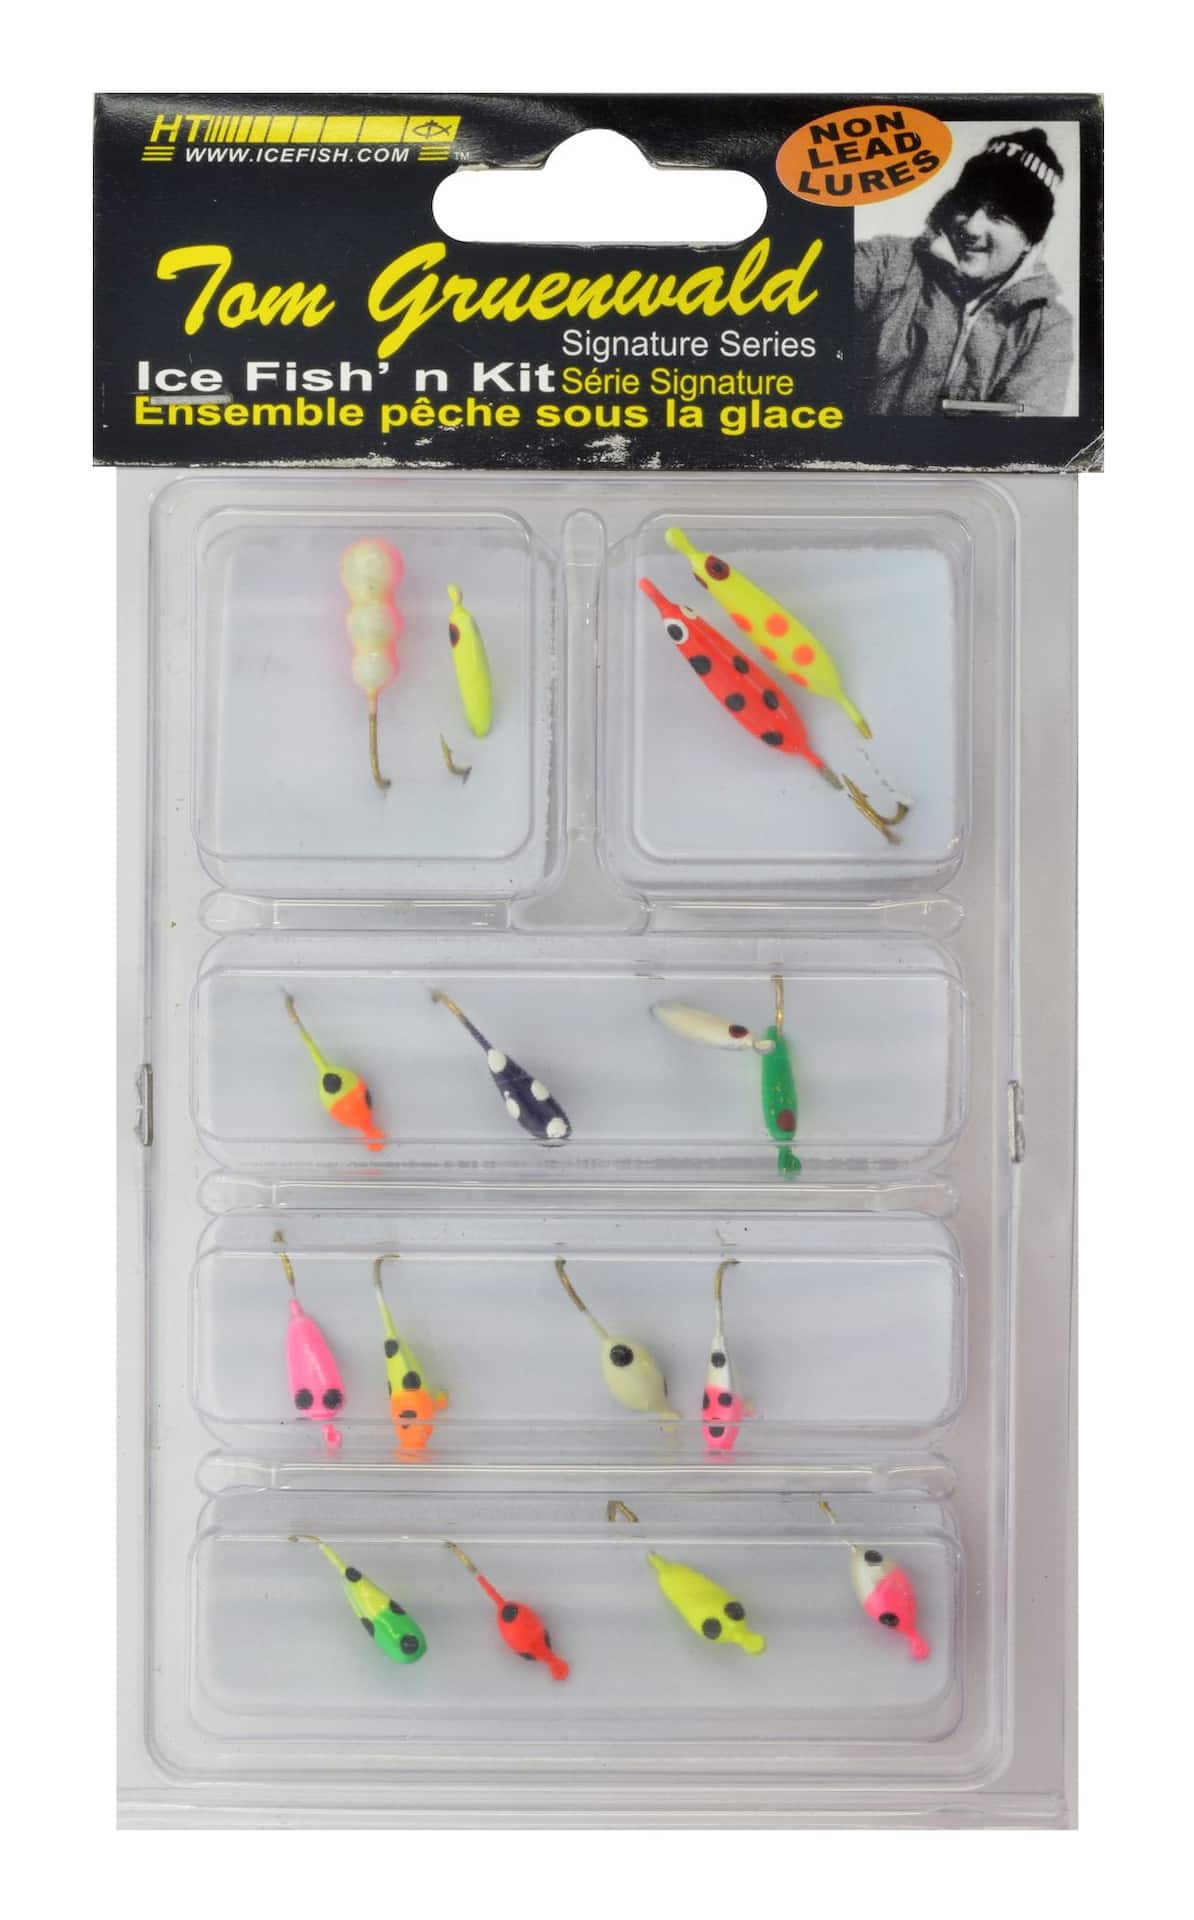 What to add to my tackle kit? New to ice fishing : r/IceFishing